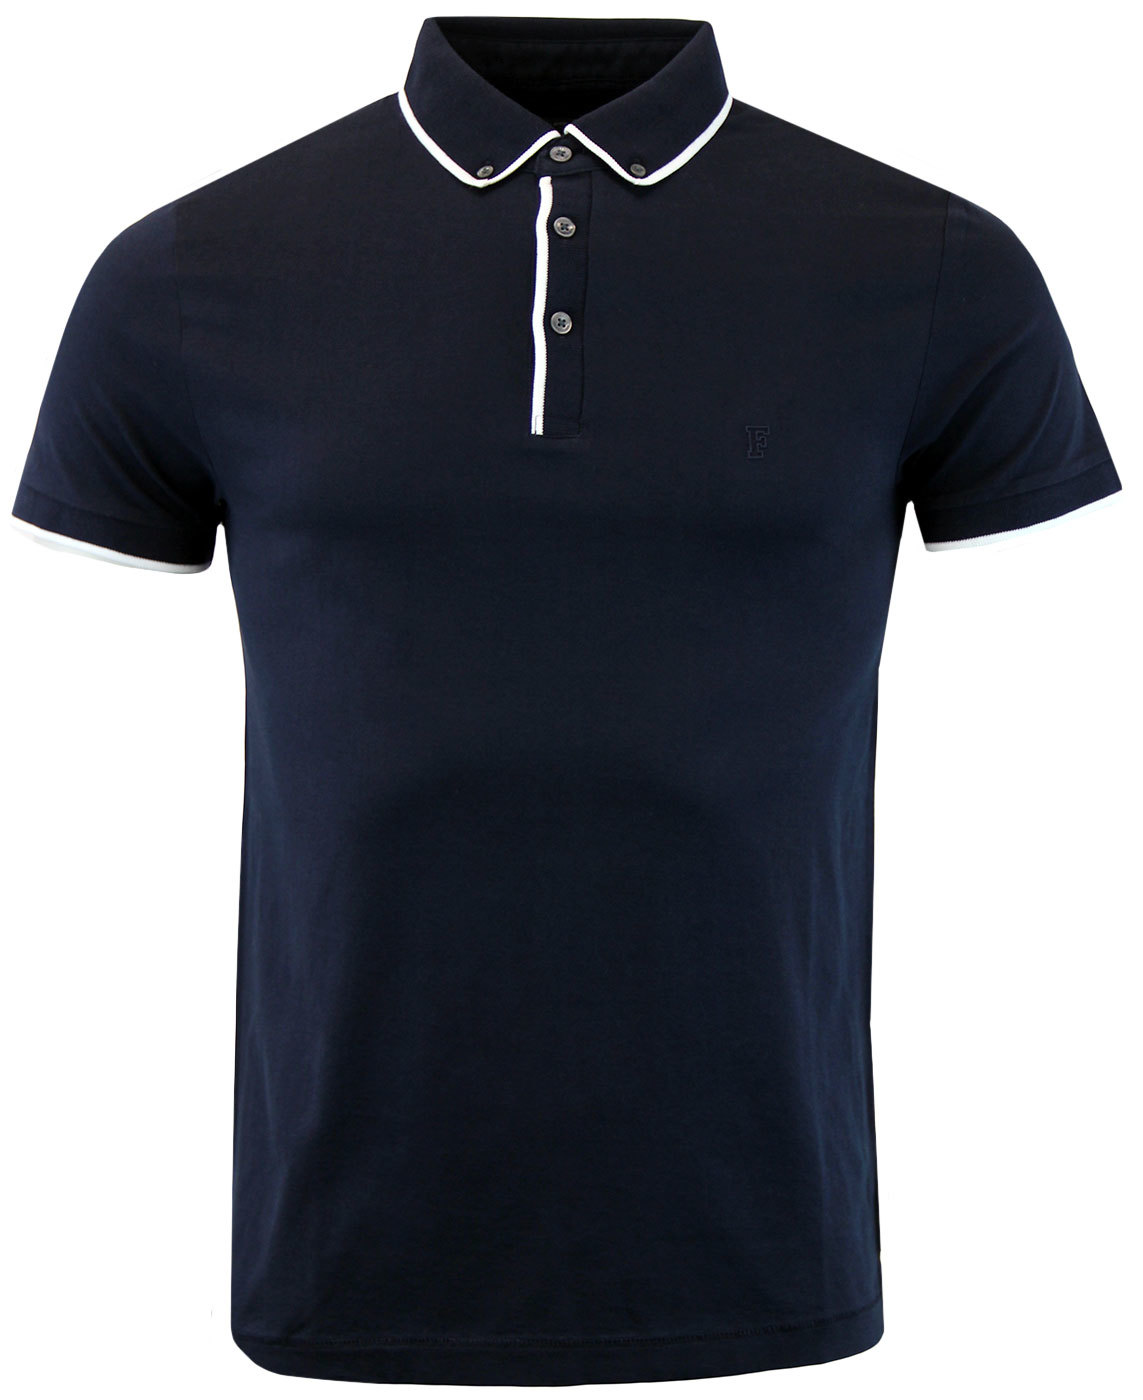 FRENCH CONNECTION Retro Mod Button Down Golf Polo Shirt in Marine